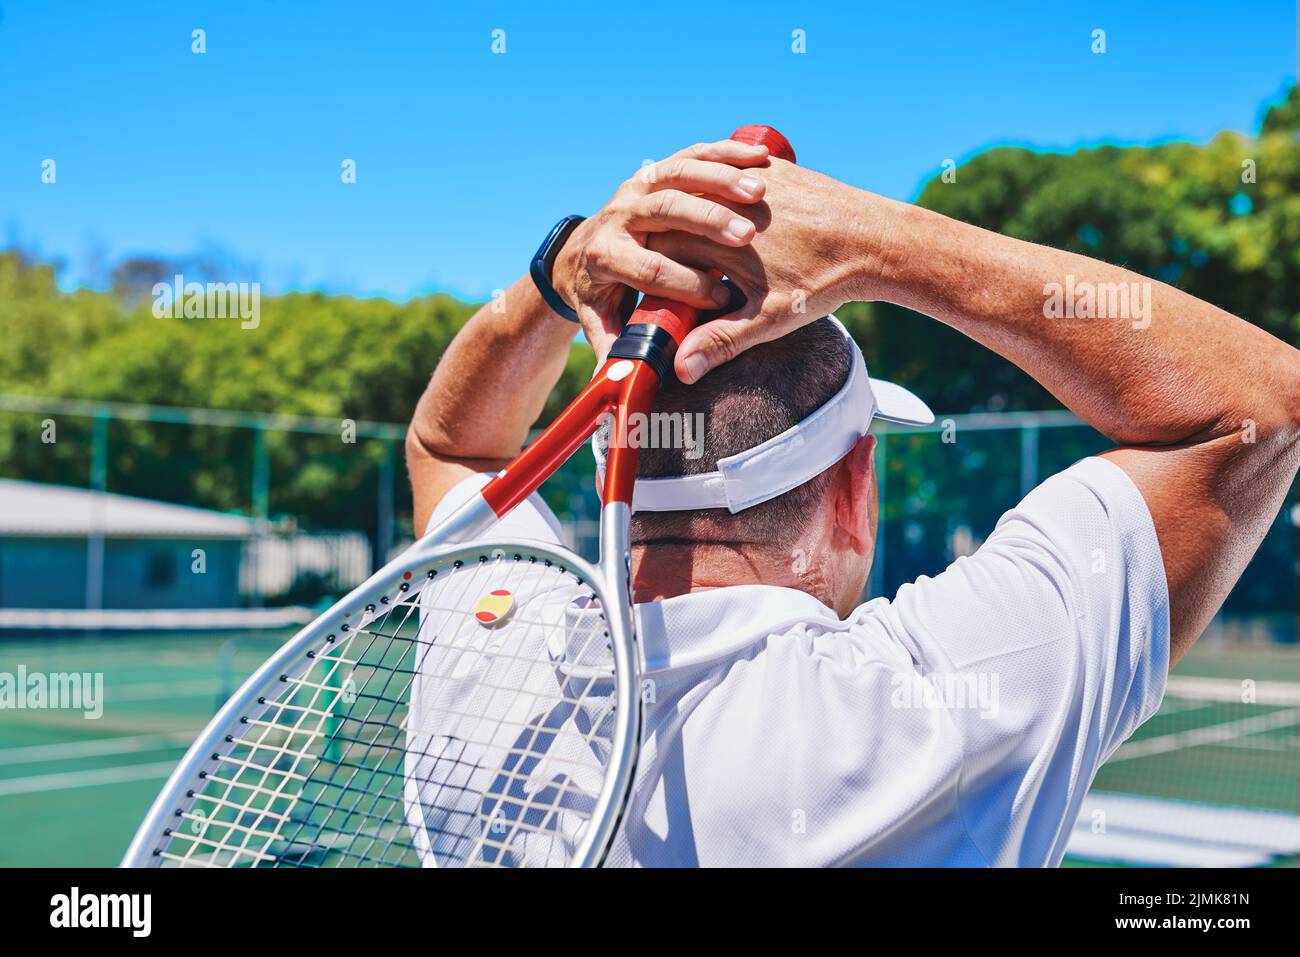 Taking a moment to catch my breath. an unrecognizable sportsman standing alone on the court during the day. Stock Photo